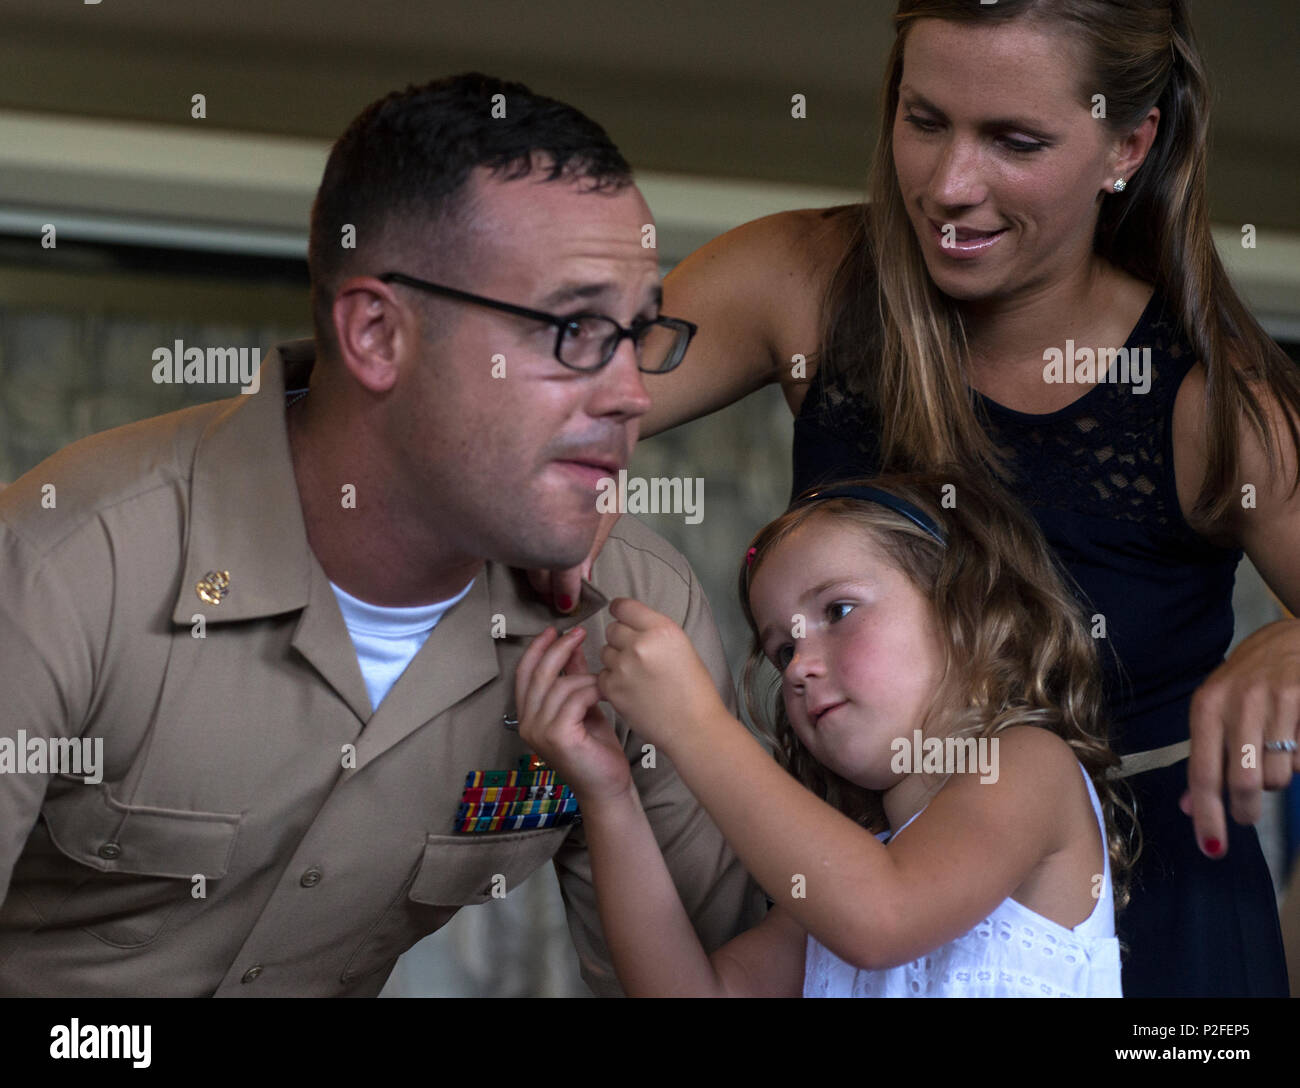 160916-N-GI544-487 PEARL HARBOR (Sept. 16, 2016) Chief Hospital Corpsman Adrian Adamson is pinned by his family during a chief pinning ceremony at Hickam Officer's Club Lanai, Joint Base Pearl Harbor-Hickam. The chief pinning ceremony is part of a long-standing tradition that honors and recognizes the years of hard work, service and leadership of dedicated Sailors in the Navy. As part of their new responsibility, new chiefs are expected to guide their junior Sailors and uphold the legacy of the chief petty officer. (U.S. Navy photo by Mass Communication Specialist 2nd Class Laurie Dexter/Relea Stock Photo